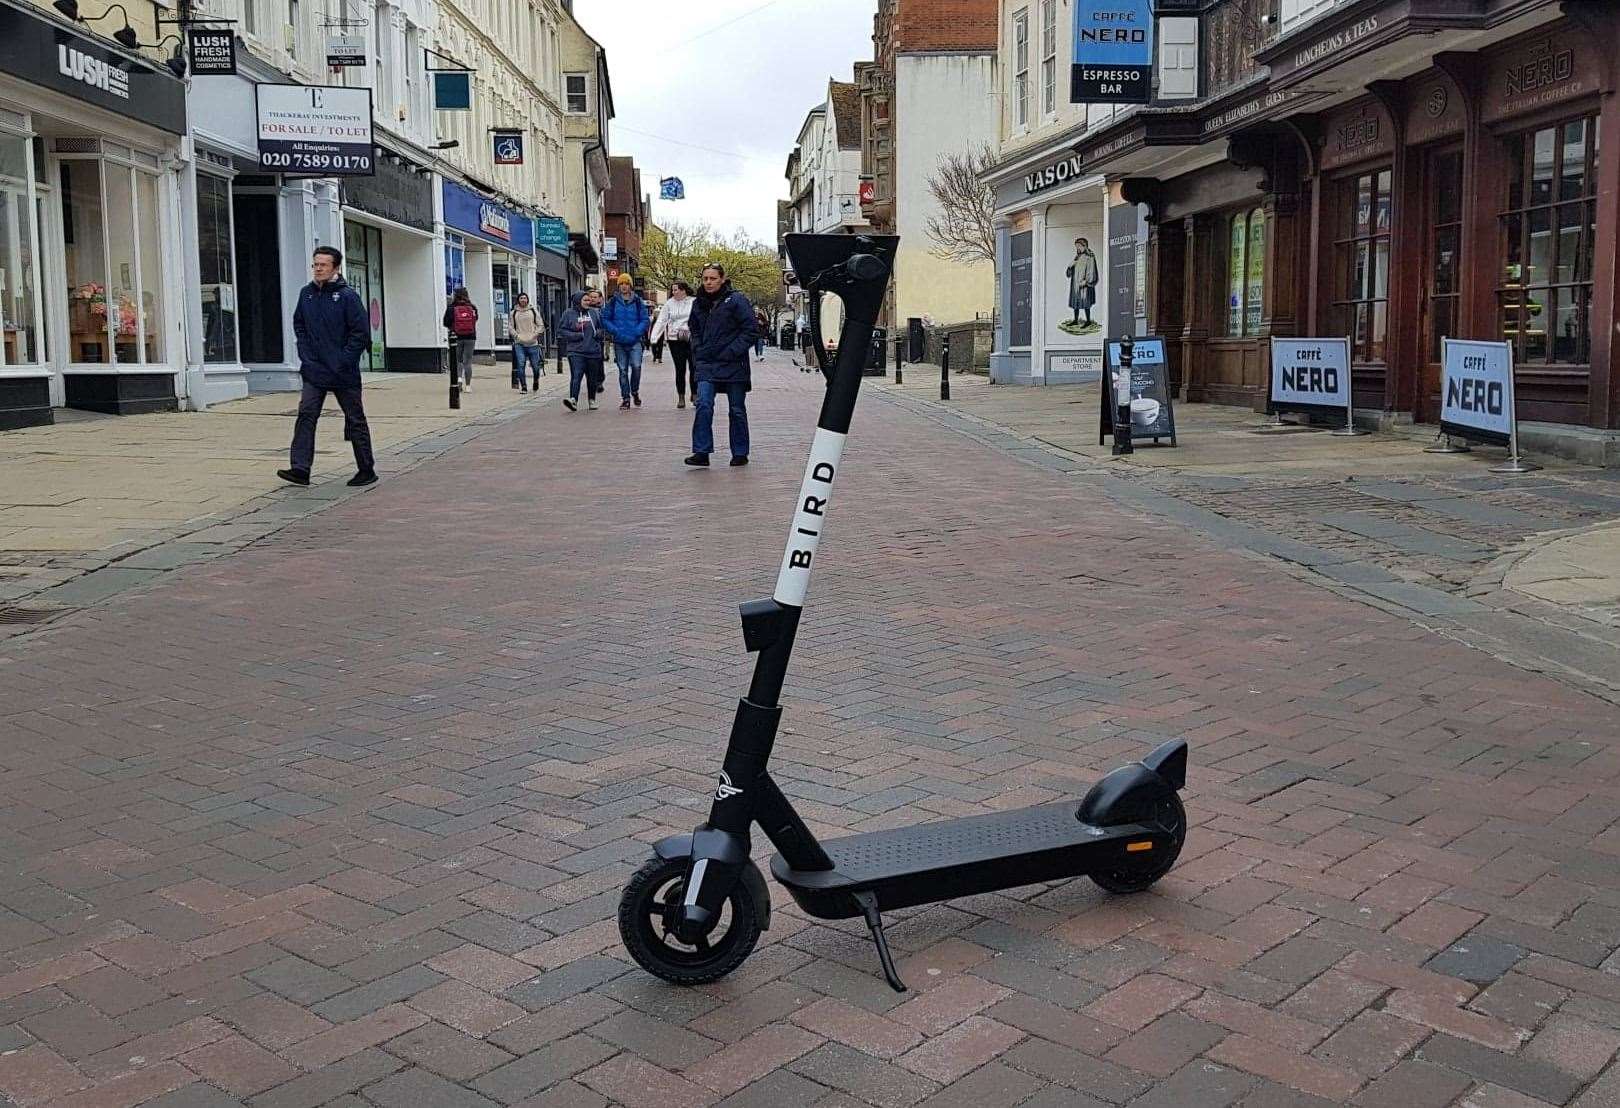 The trial is headed up by e-scooter rental firm Bird